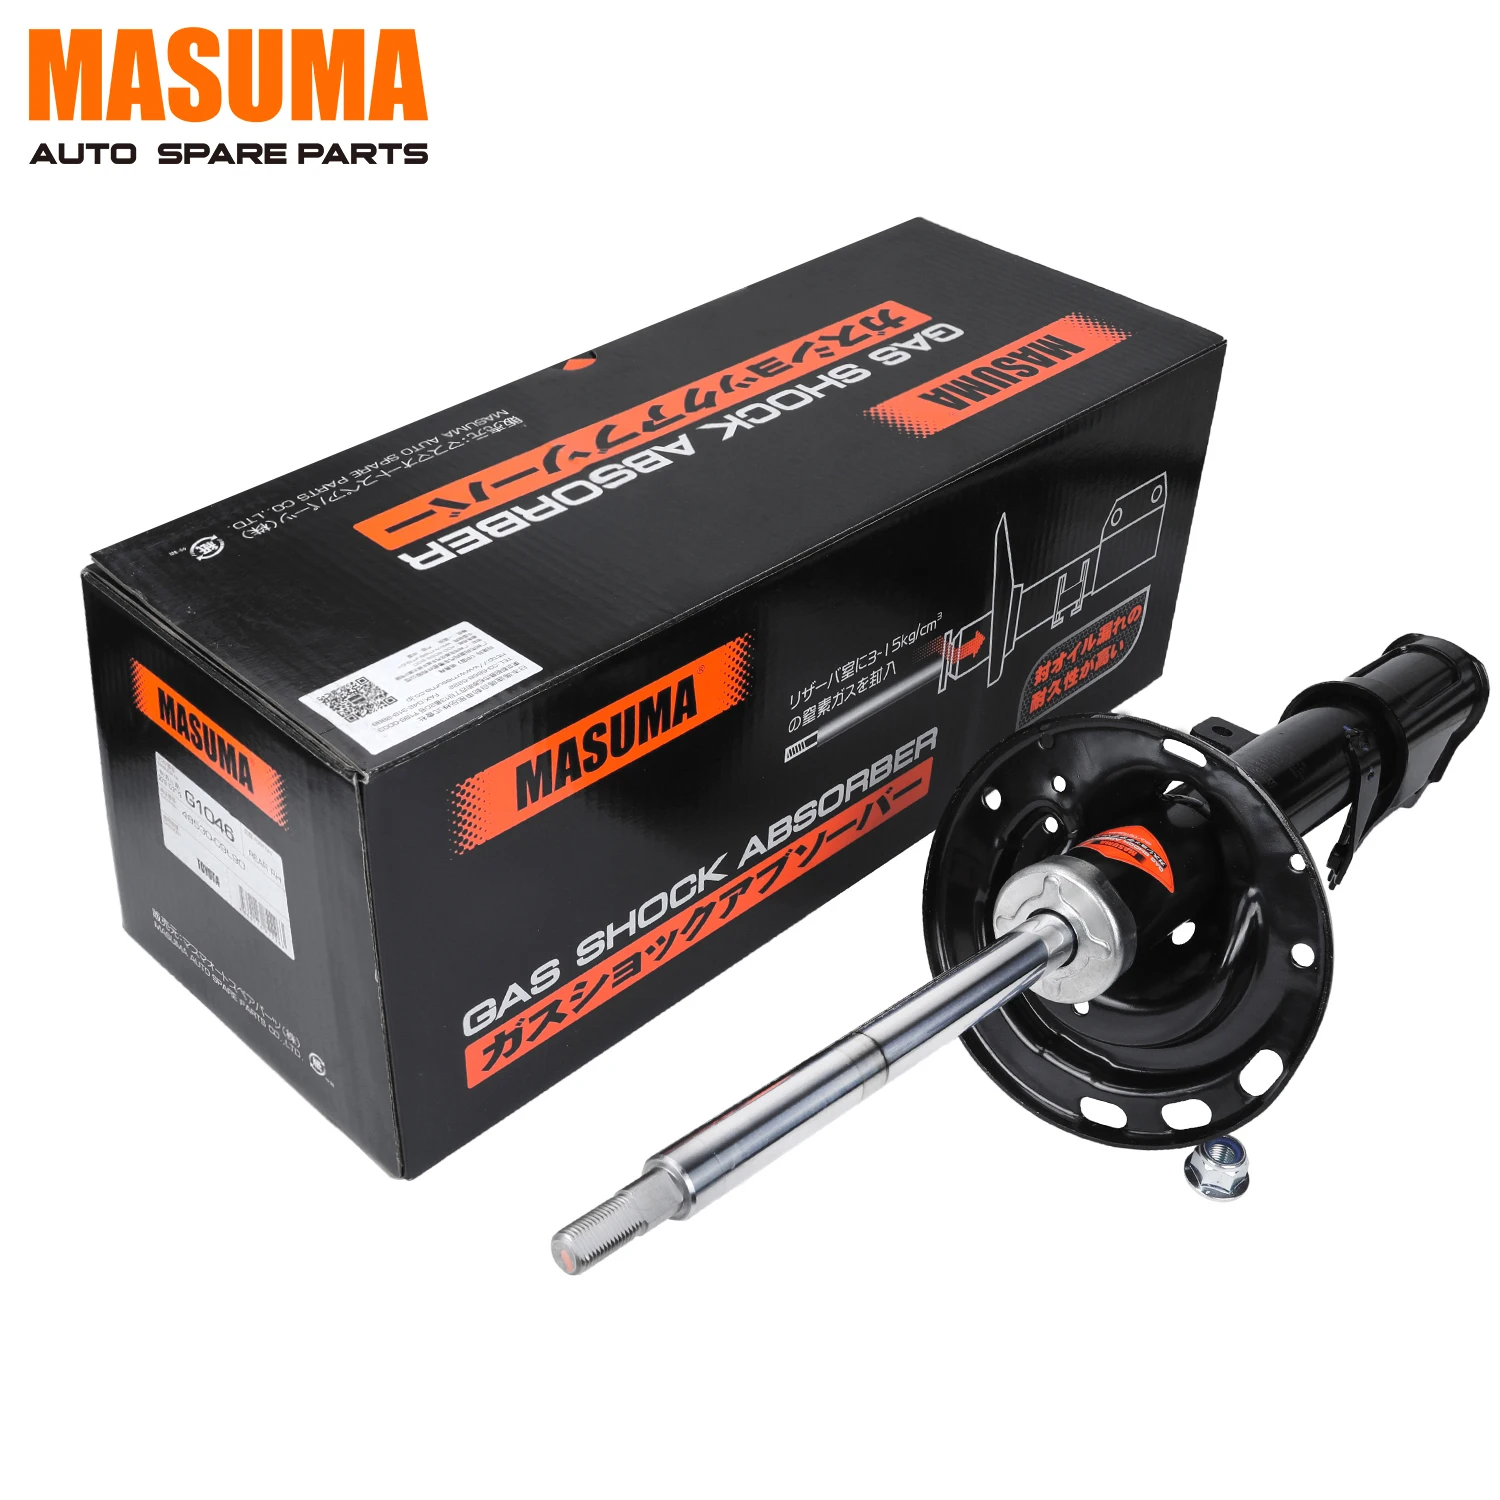 G1046 MASUMA Vehicles Rear Axle right Suspension Shock Absorbers 